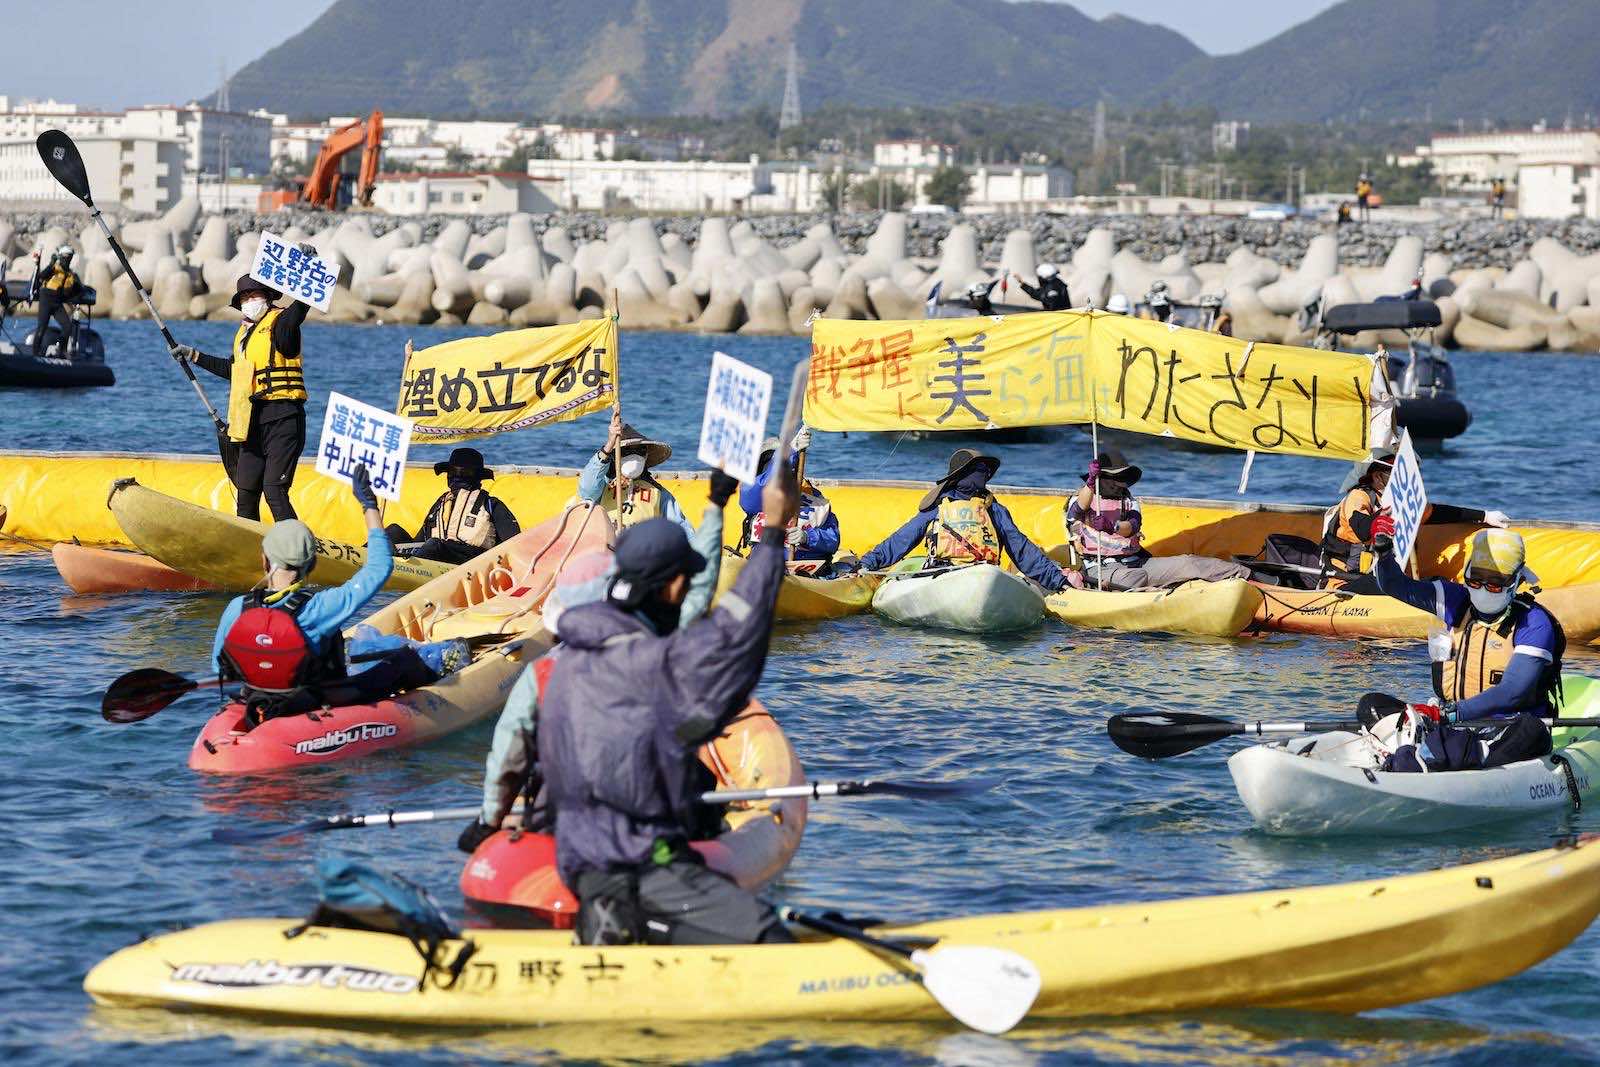 Demonstrators in December protesting land reclamation work for the planned relocation of US Marine Corps Air Station Futenma in the Henoko coastal area of Nago, Okinawa Prefecture, Japan (Kyodo News via Getty Images)